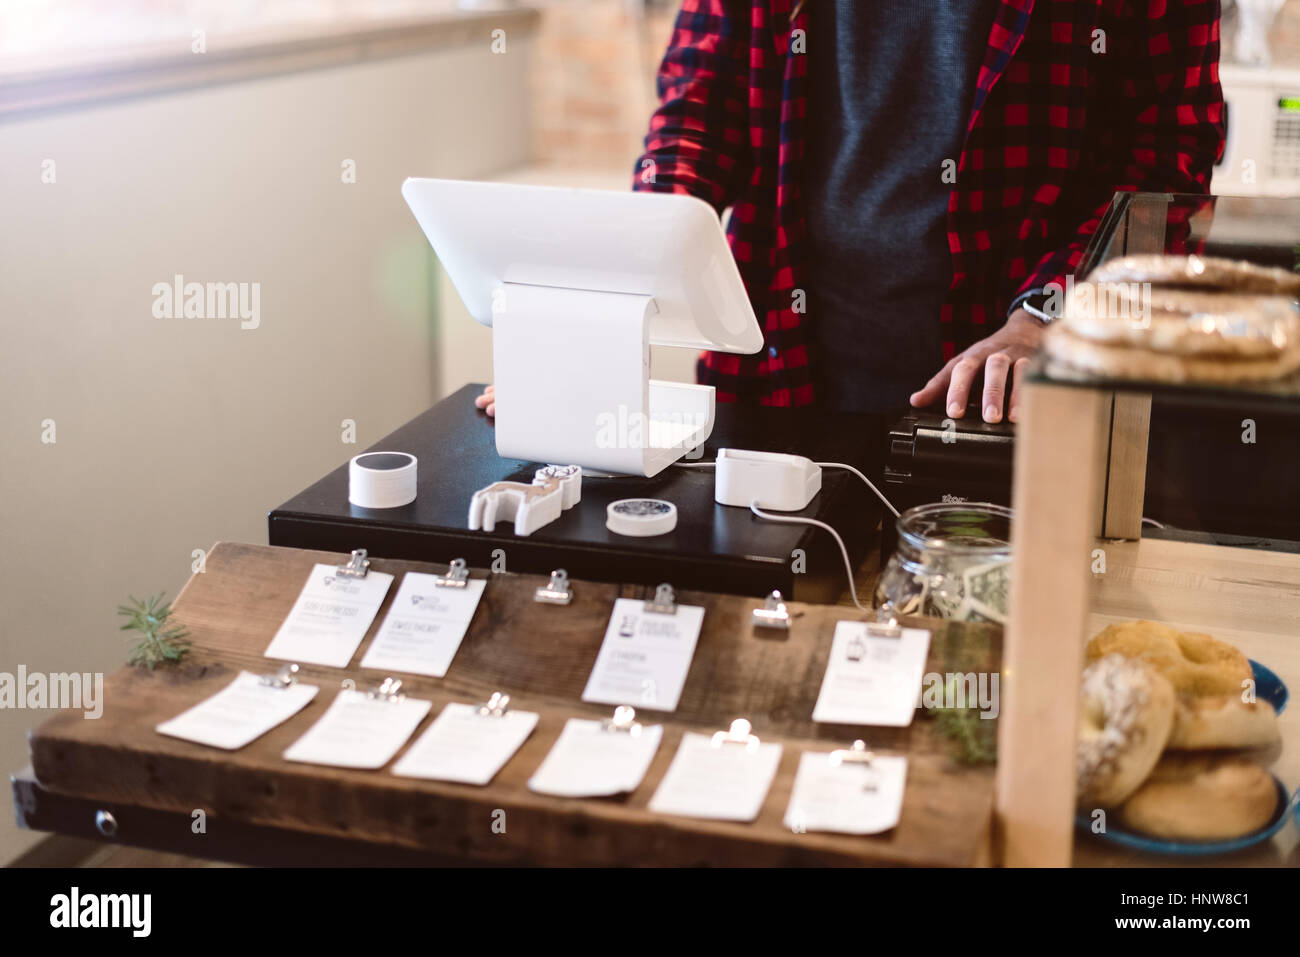 Cashier using cash register in cafe Stock Photo